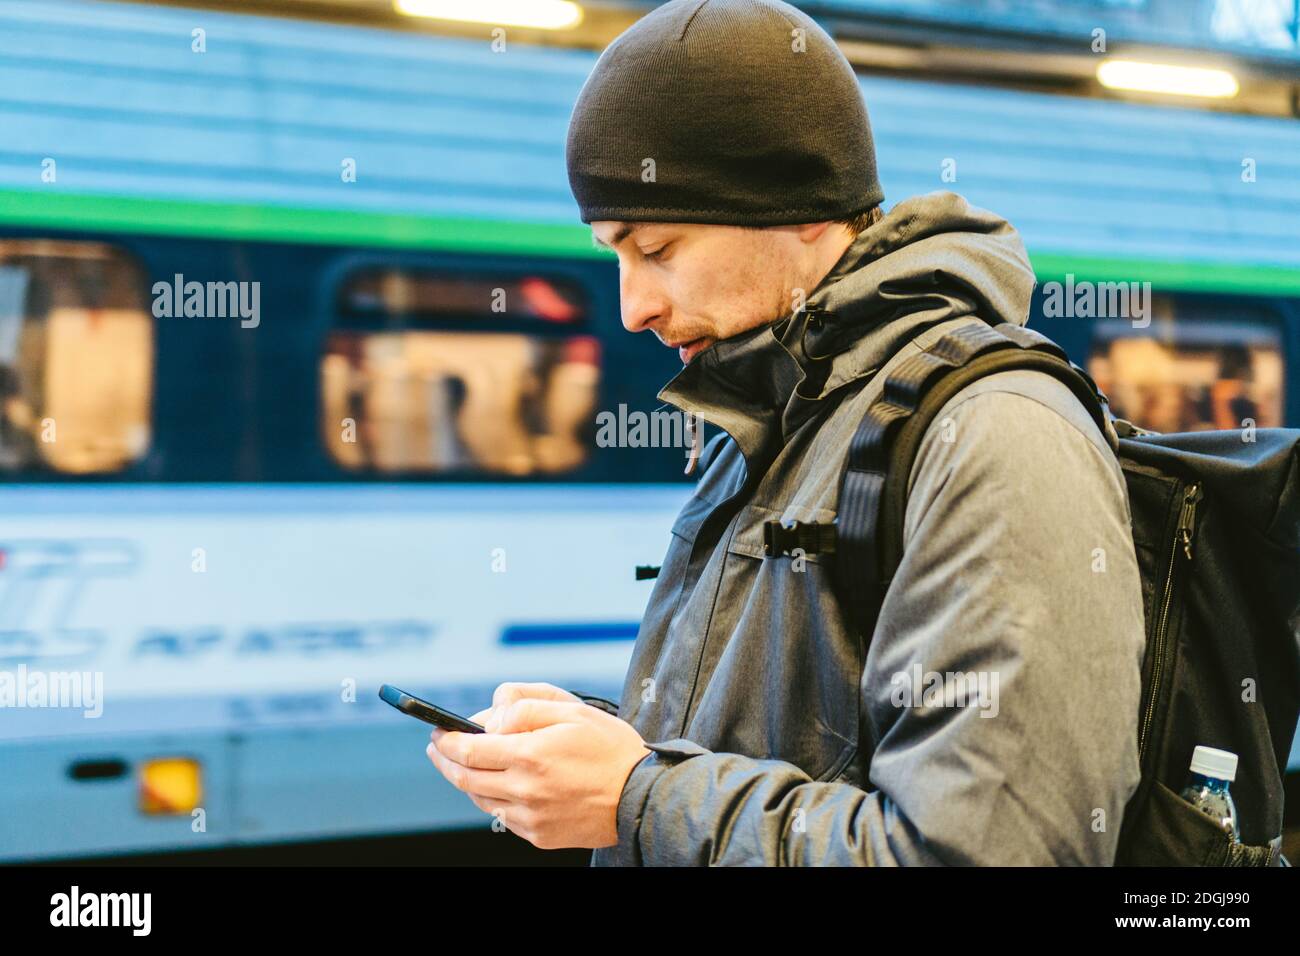 Train Station in Sopot, Poland, Europe. Attractive man waiting at the train station. Thinking about trip, with backpack. Travel Stock Photo